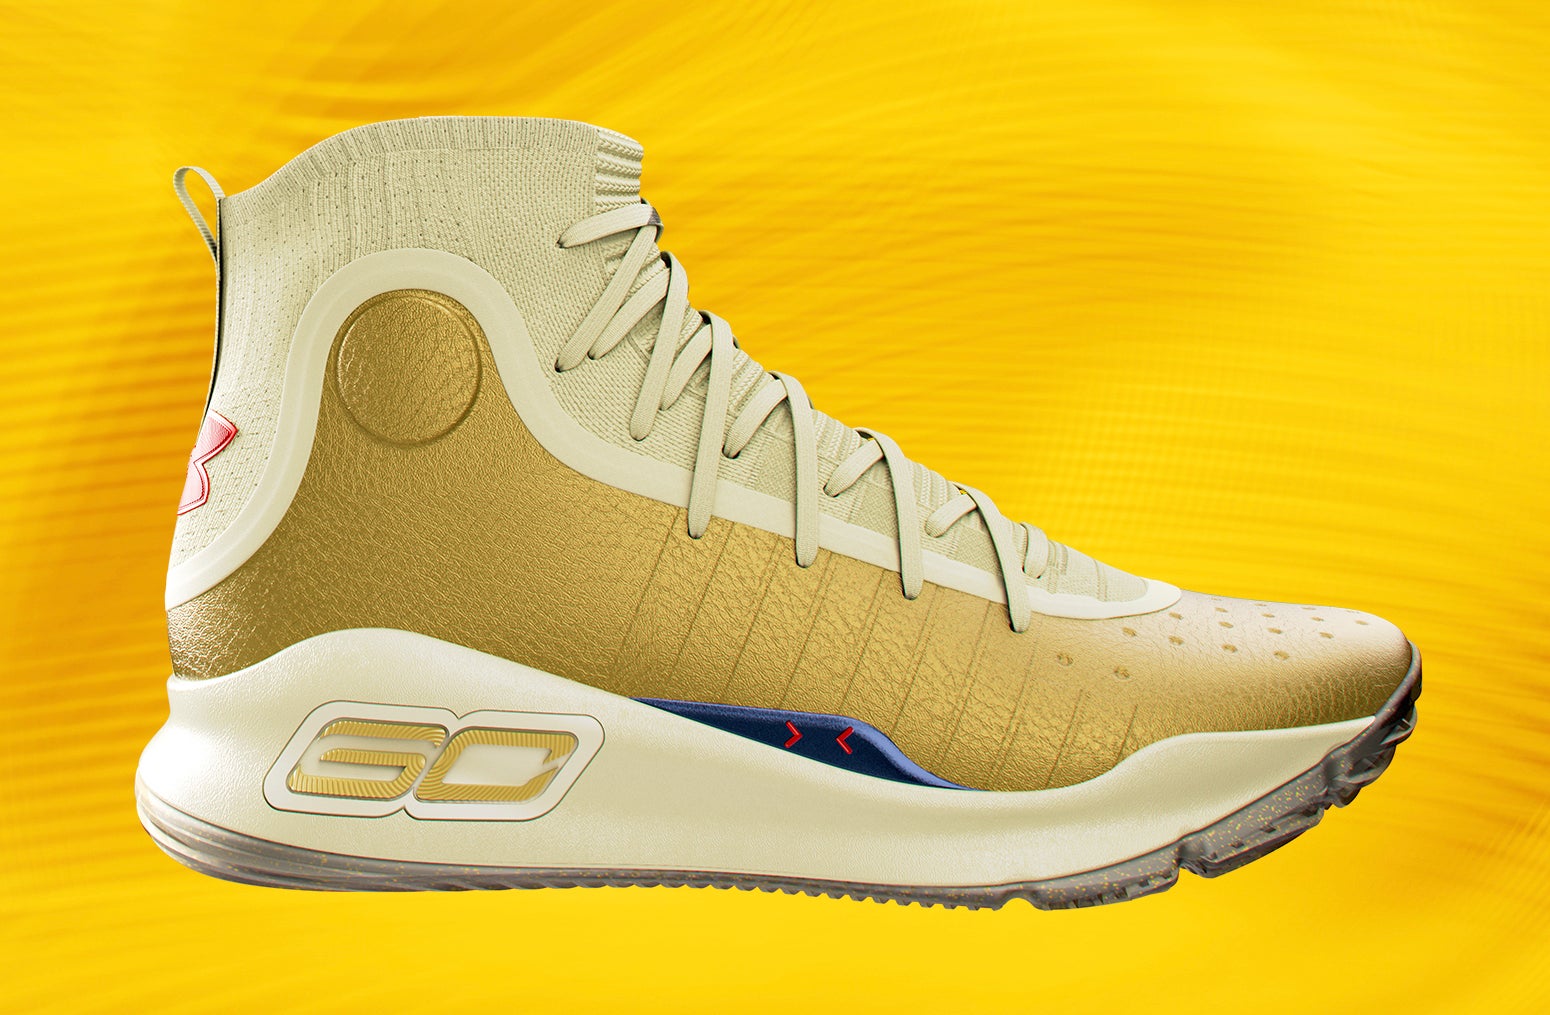 Under Armour Curry 4 Championship Mindset Release Date